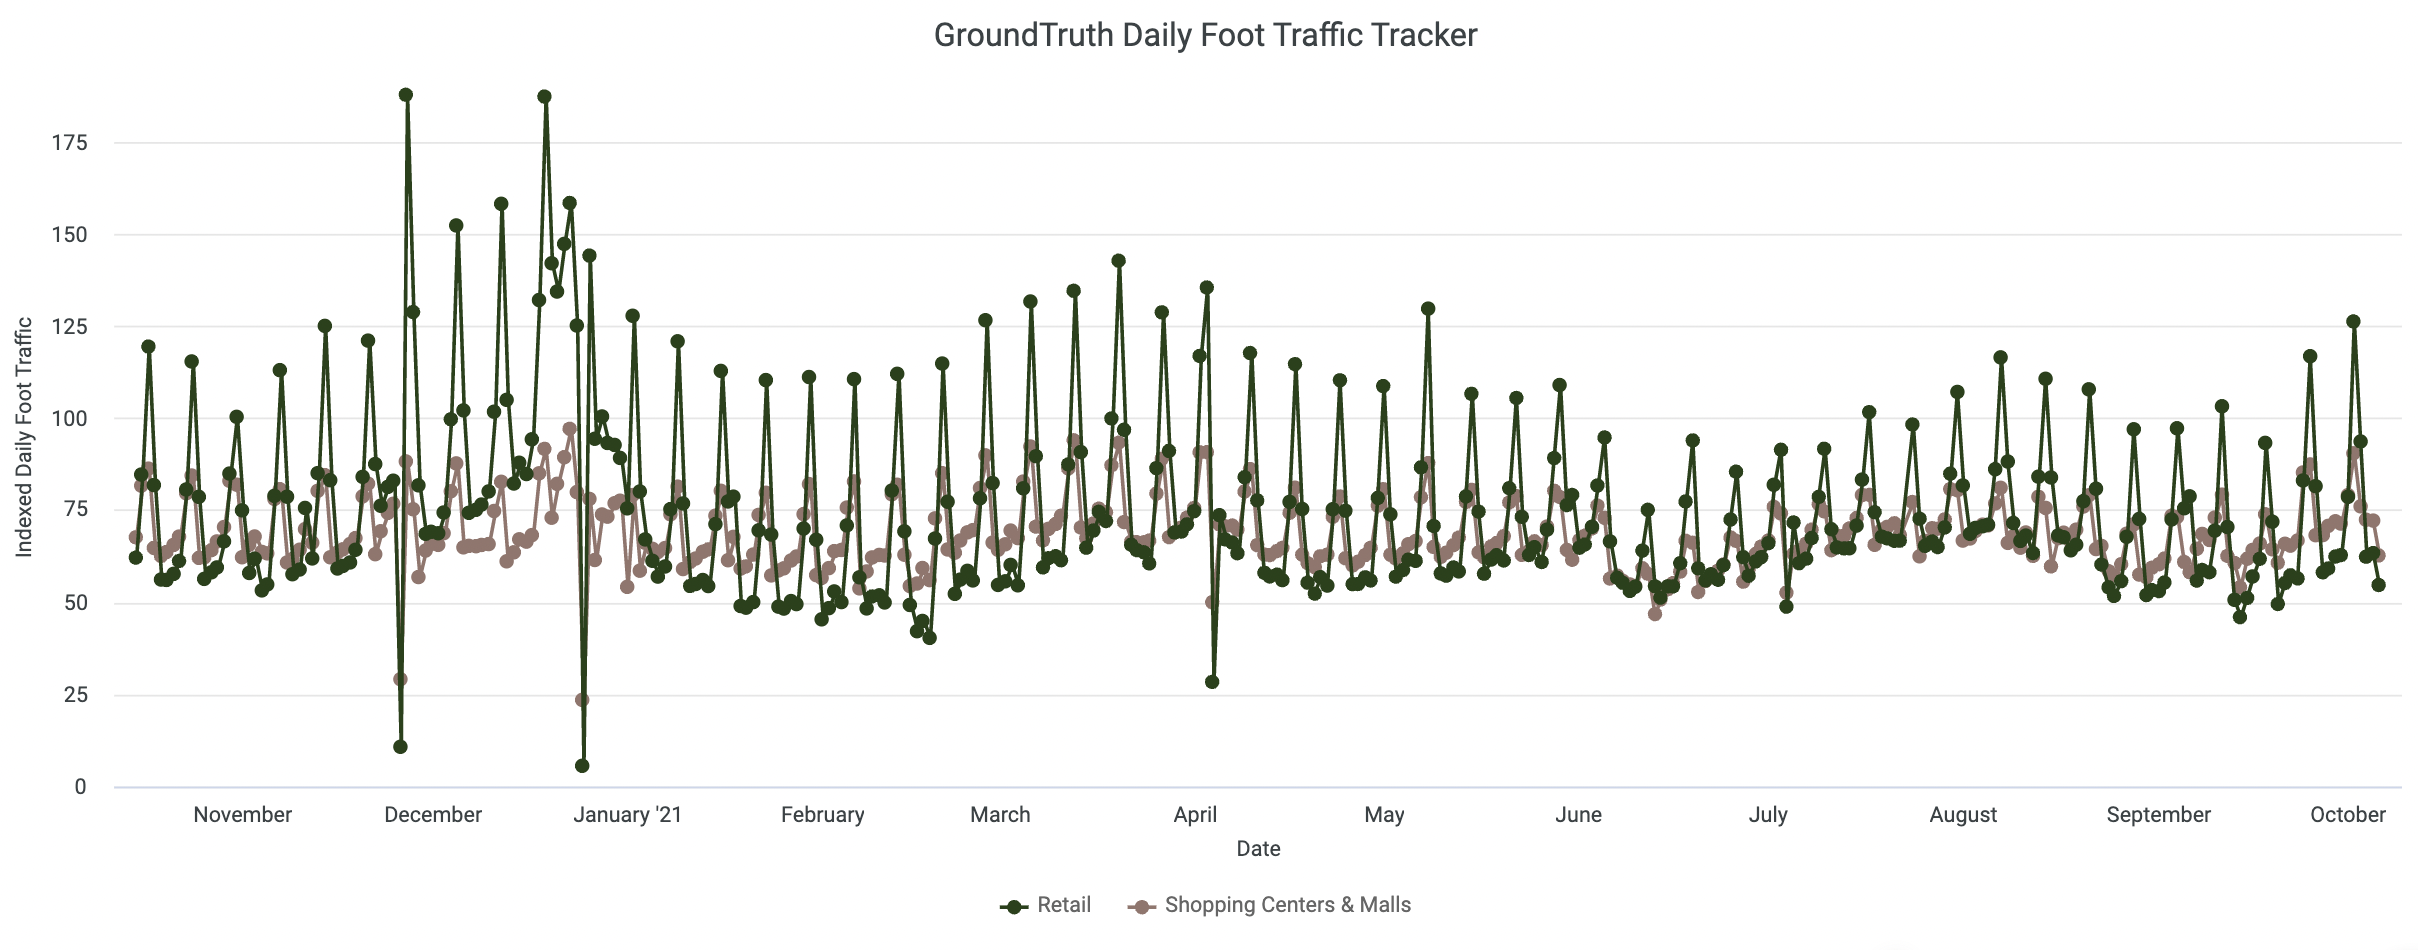 Graph of holiday shopping trends in foot traffic from November 2020-October 2021.